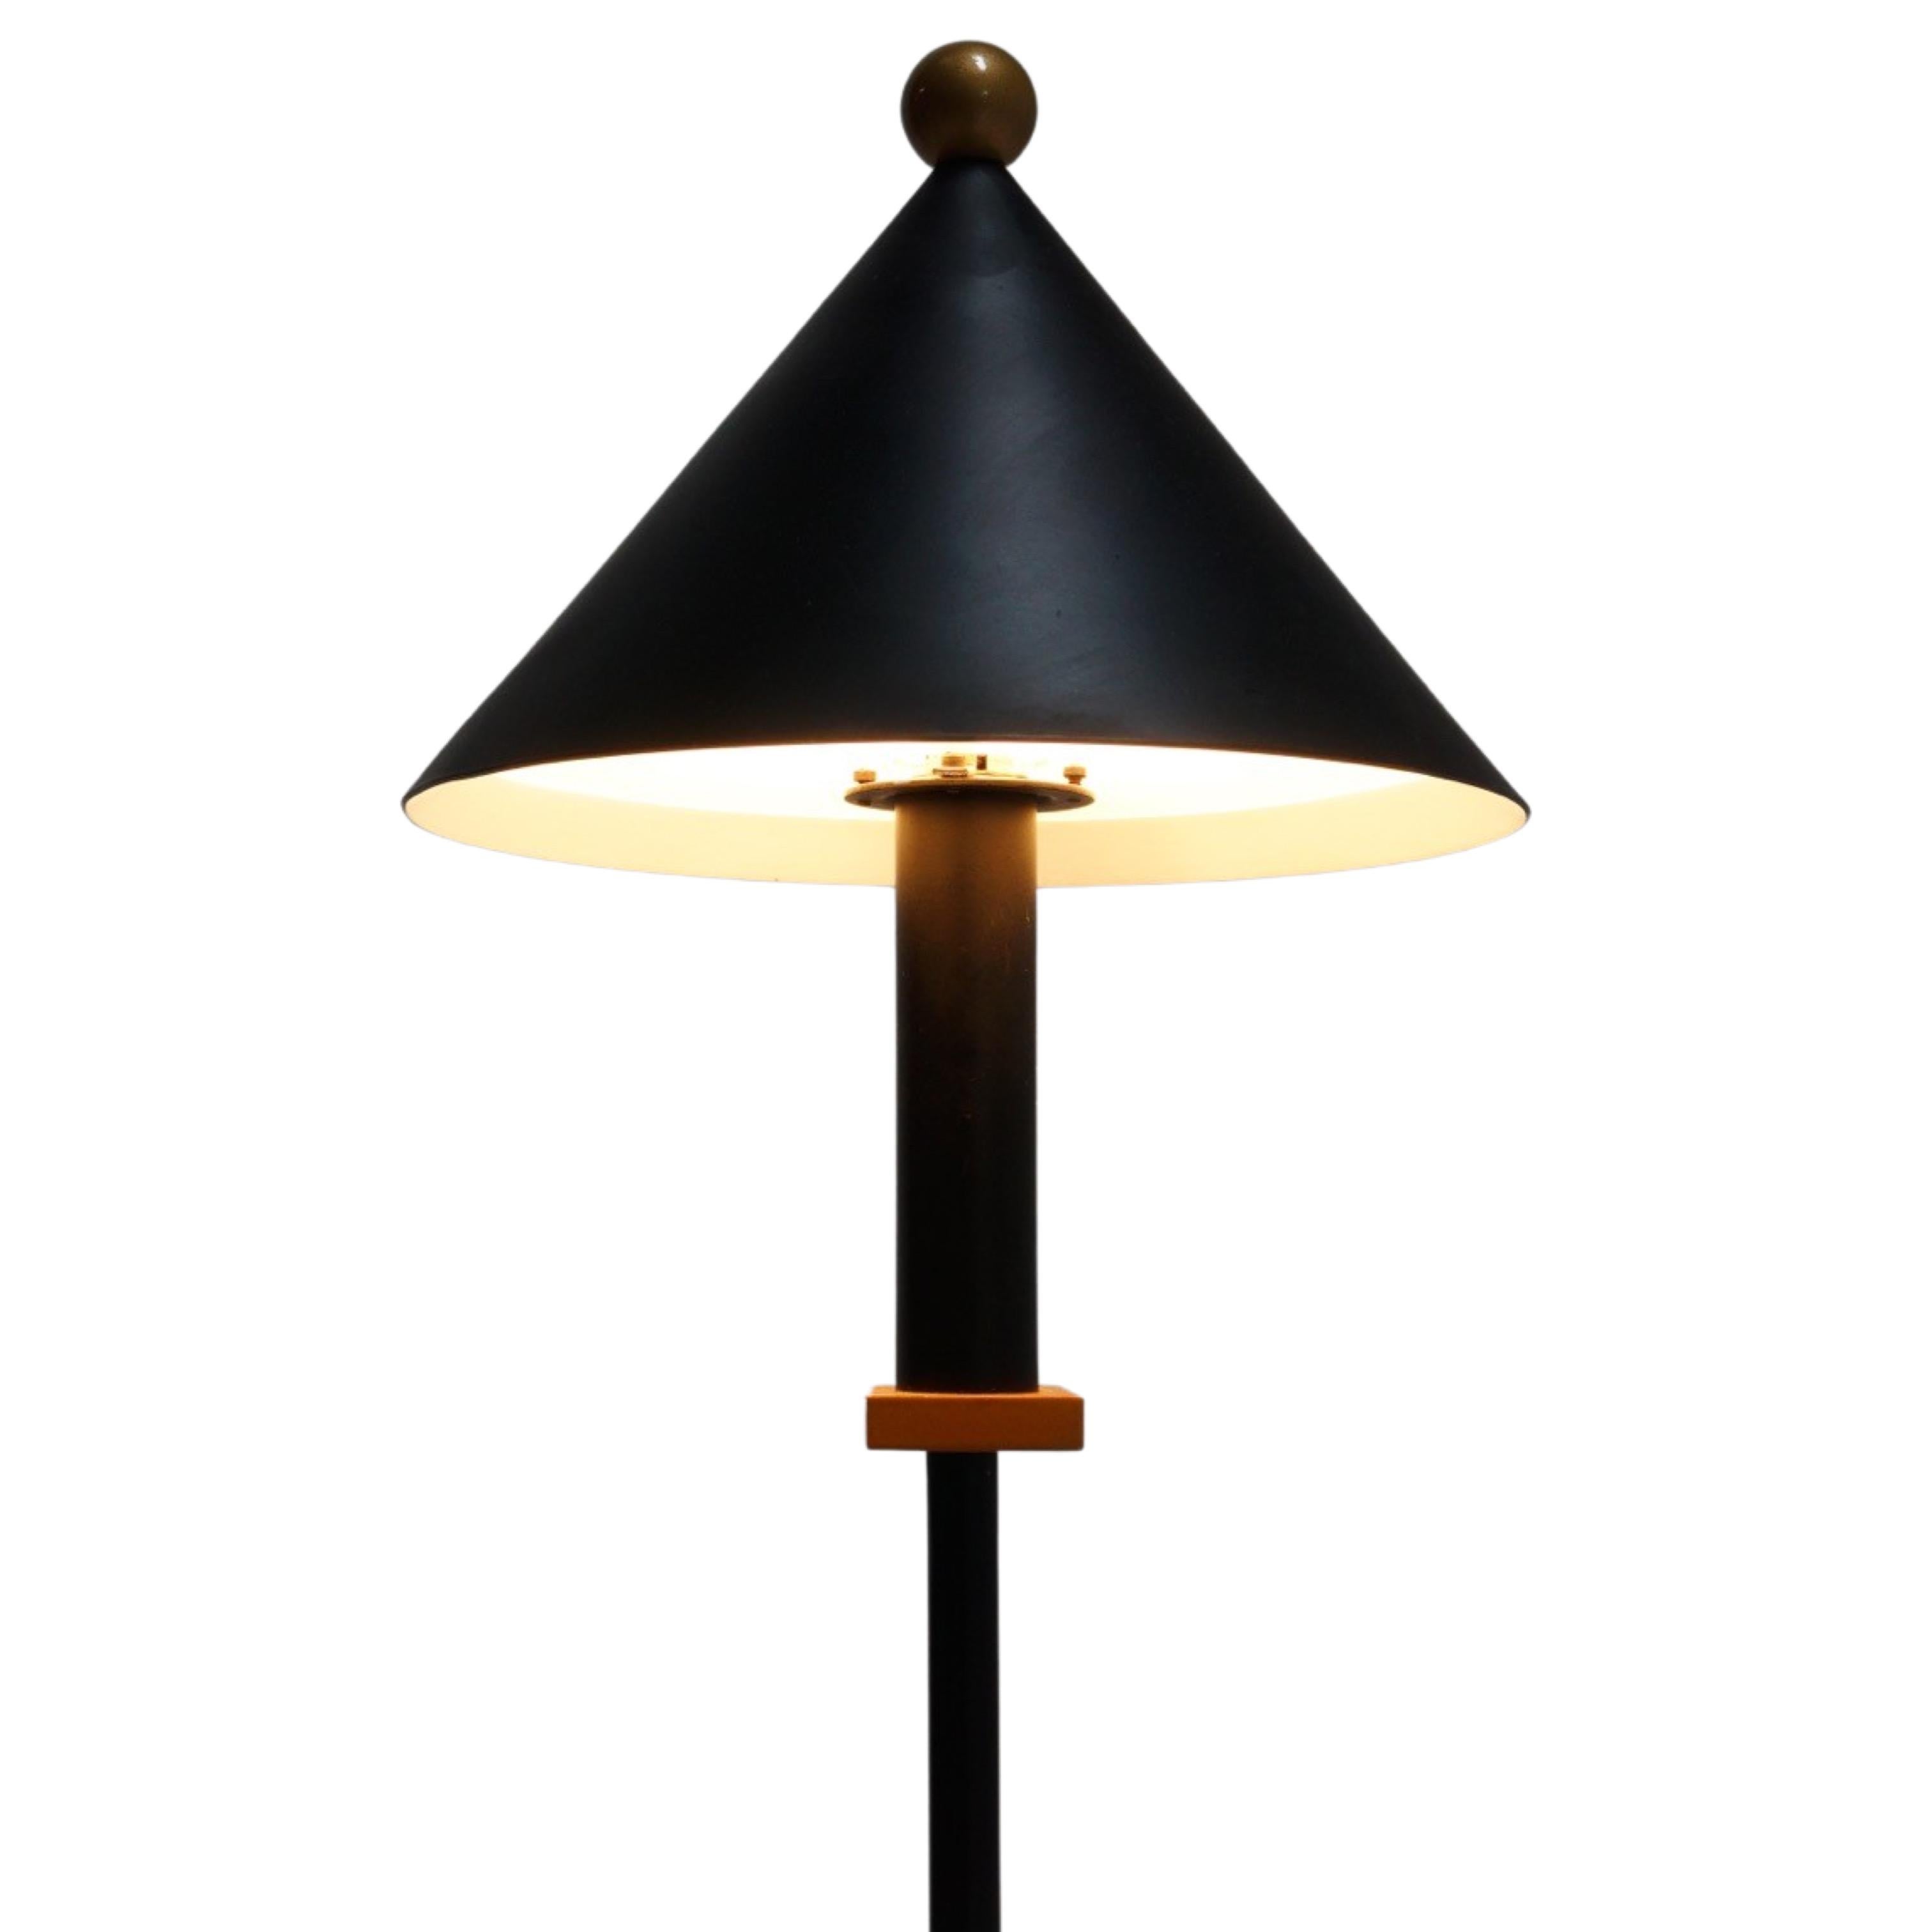 This 1990s postmodern black metal table lamp is living ode to the whimsical charm of the Memphis style. This Robert Sonneman designed piece is a quinessential tribute to the Memphis group'suse of unconventional and asymmetrical geometric shapes.